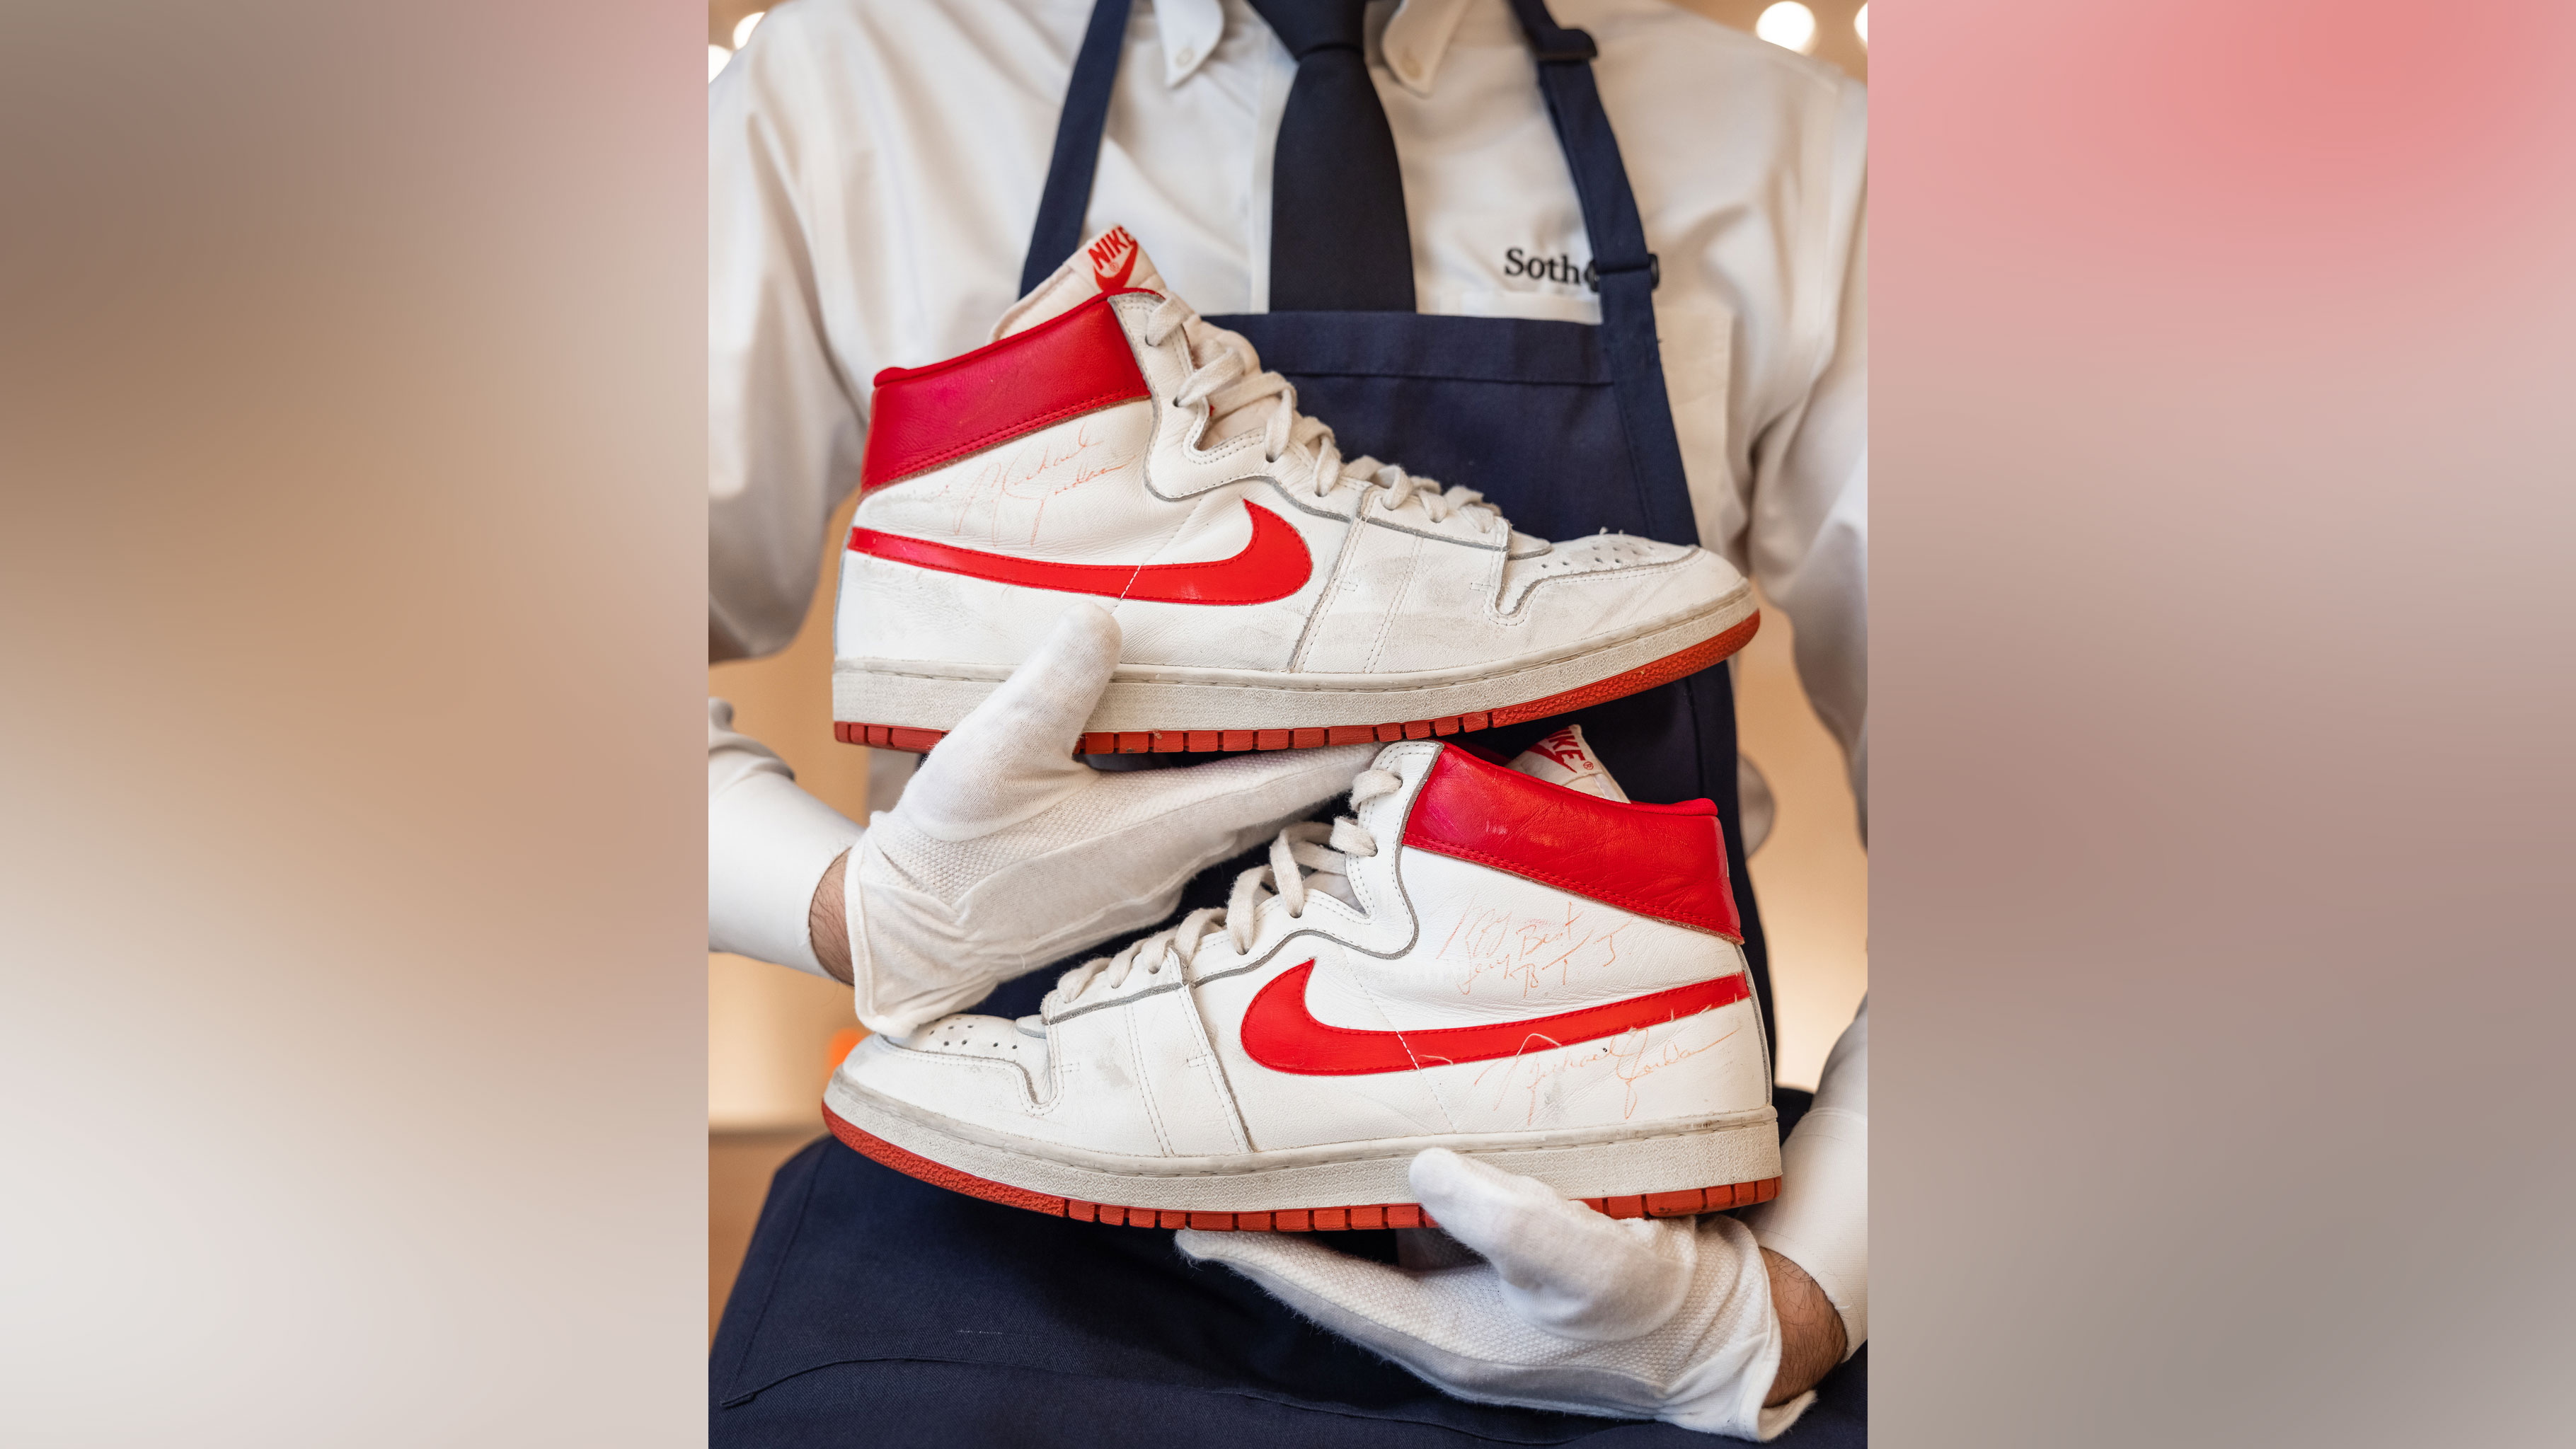 Since punch Perfervid Michael Jordan's sneakers sell for record-breaking $1.47 million - CNN Style